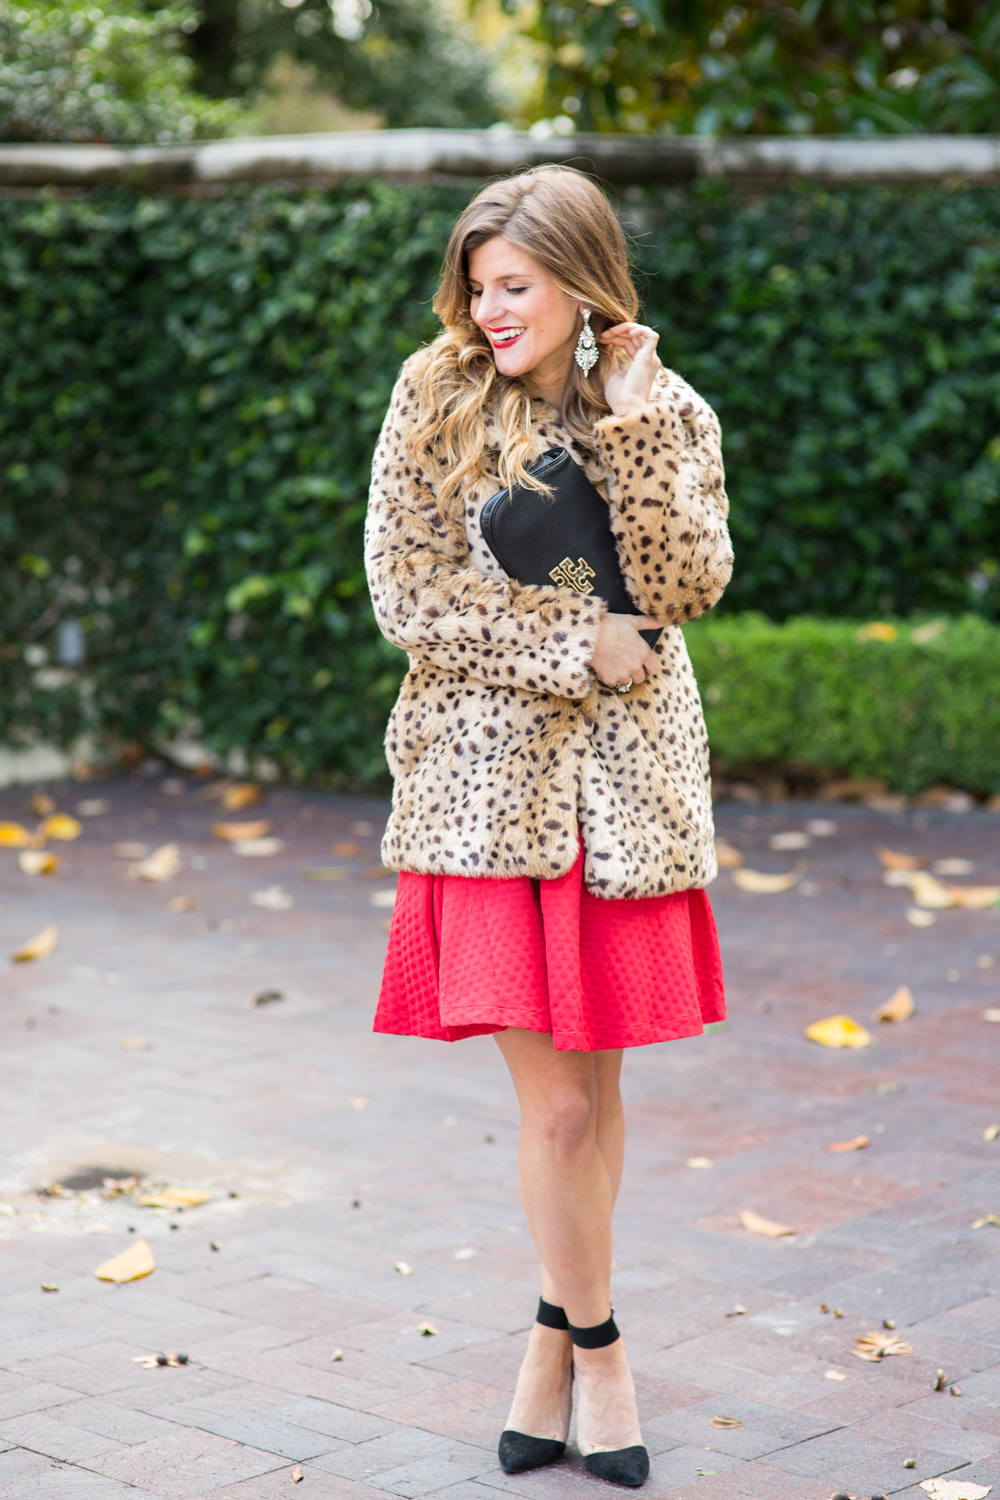 festive holiday party outfit - faux fur leopard coat over red dress for a holiday party